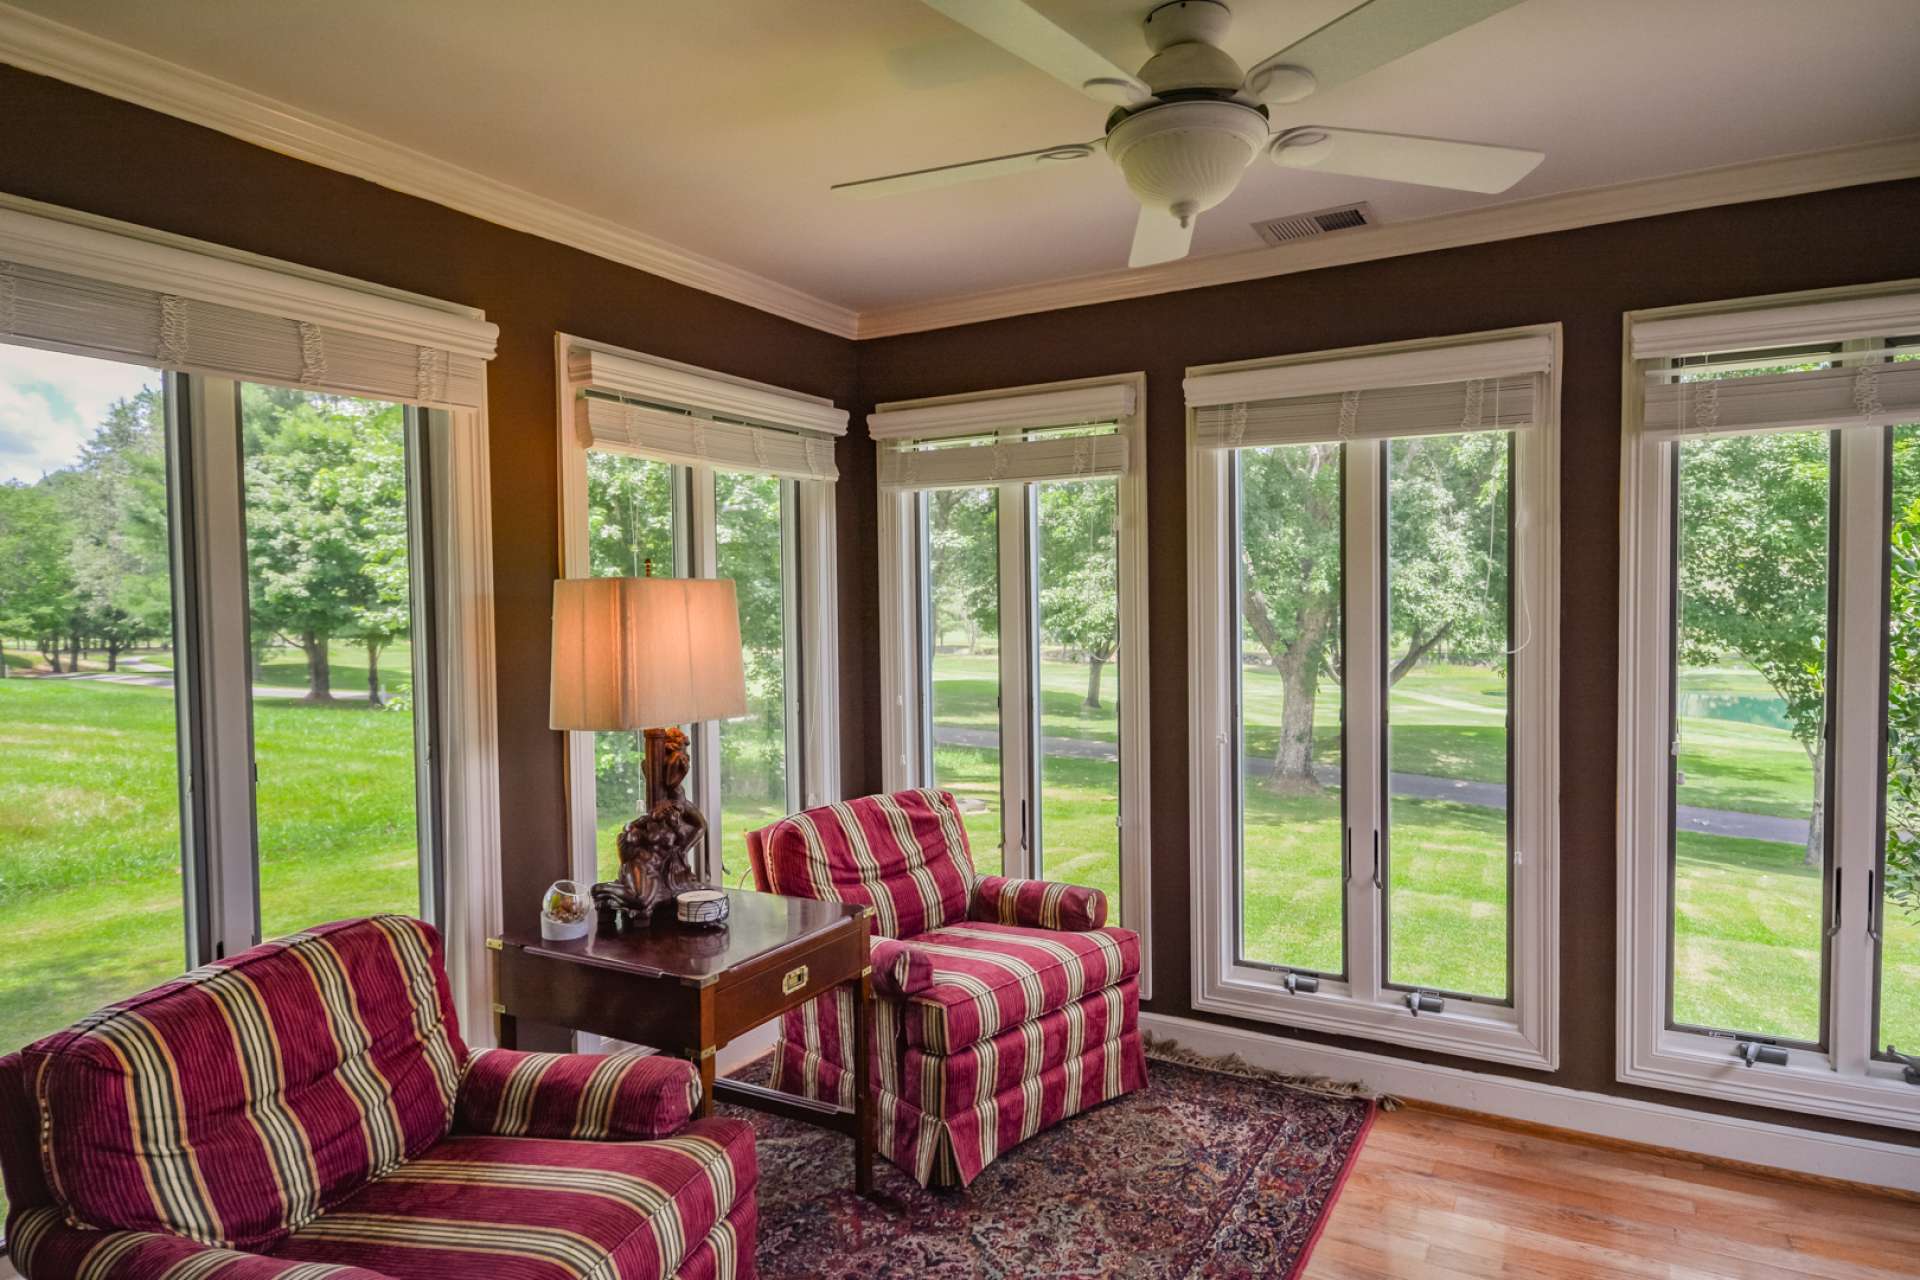 From the sun room, enter onto the open back deck for outdoor dining and entertaining.